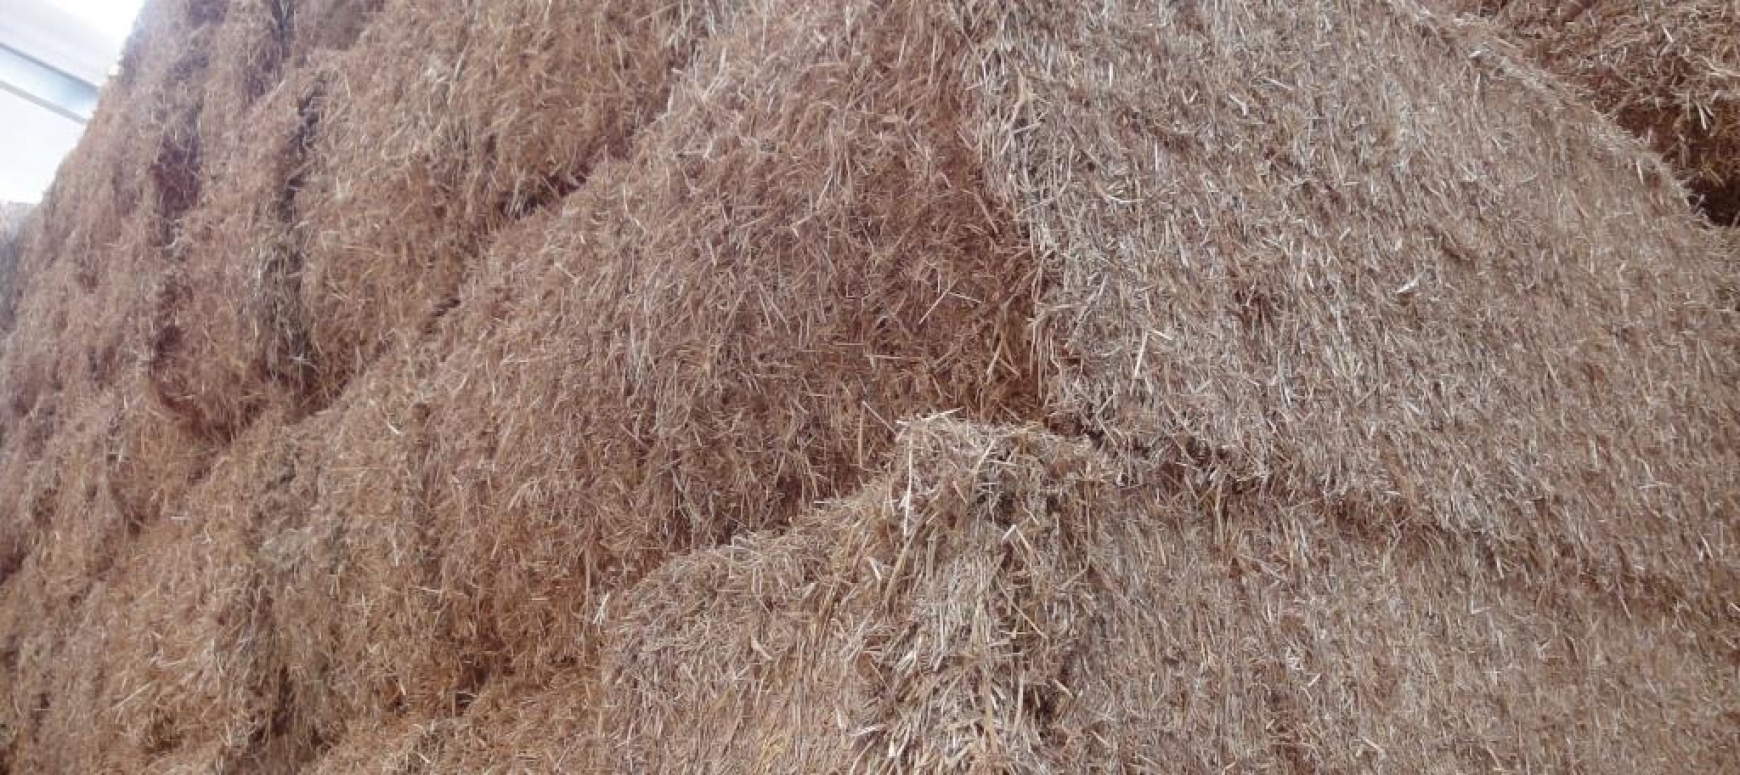 A close up of large straw bales stacked up